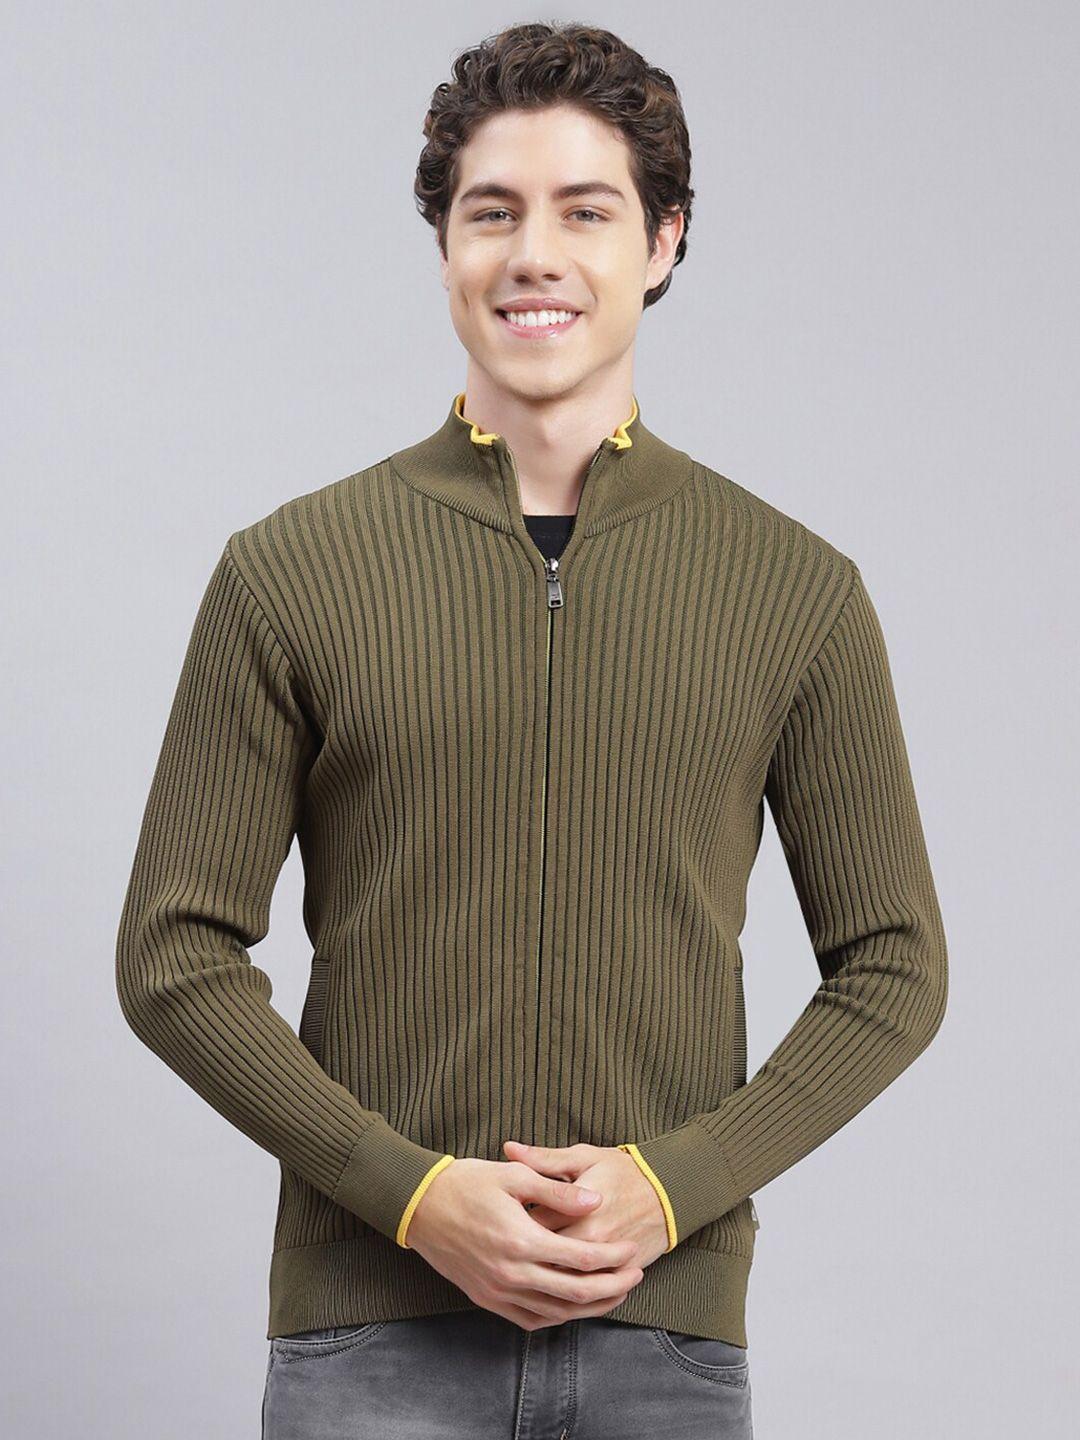 monte-carlo-ribbed-mock-collar-pullover-sweaters